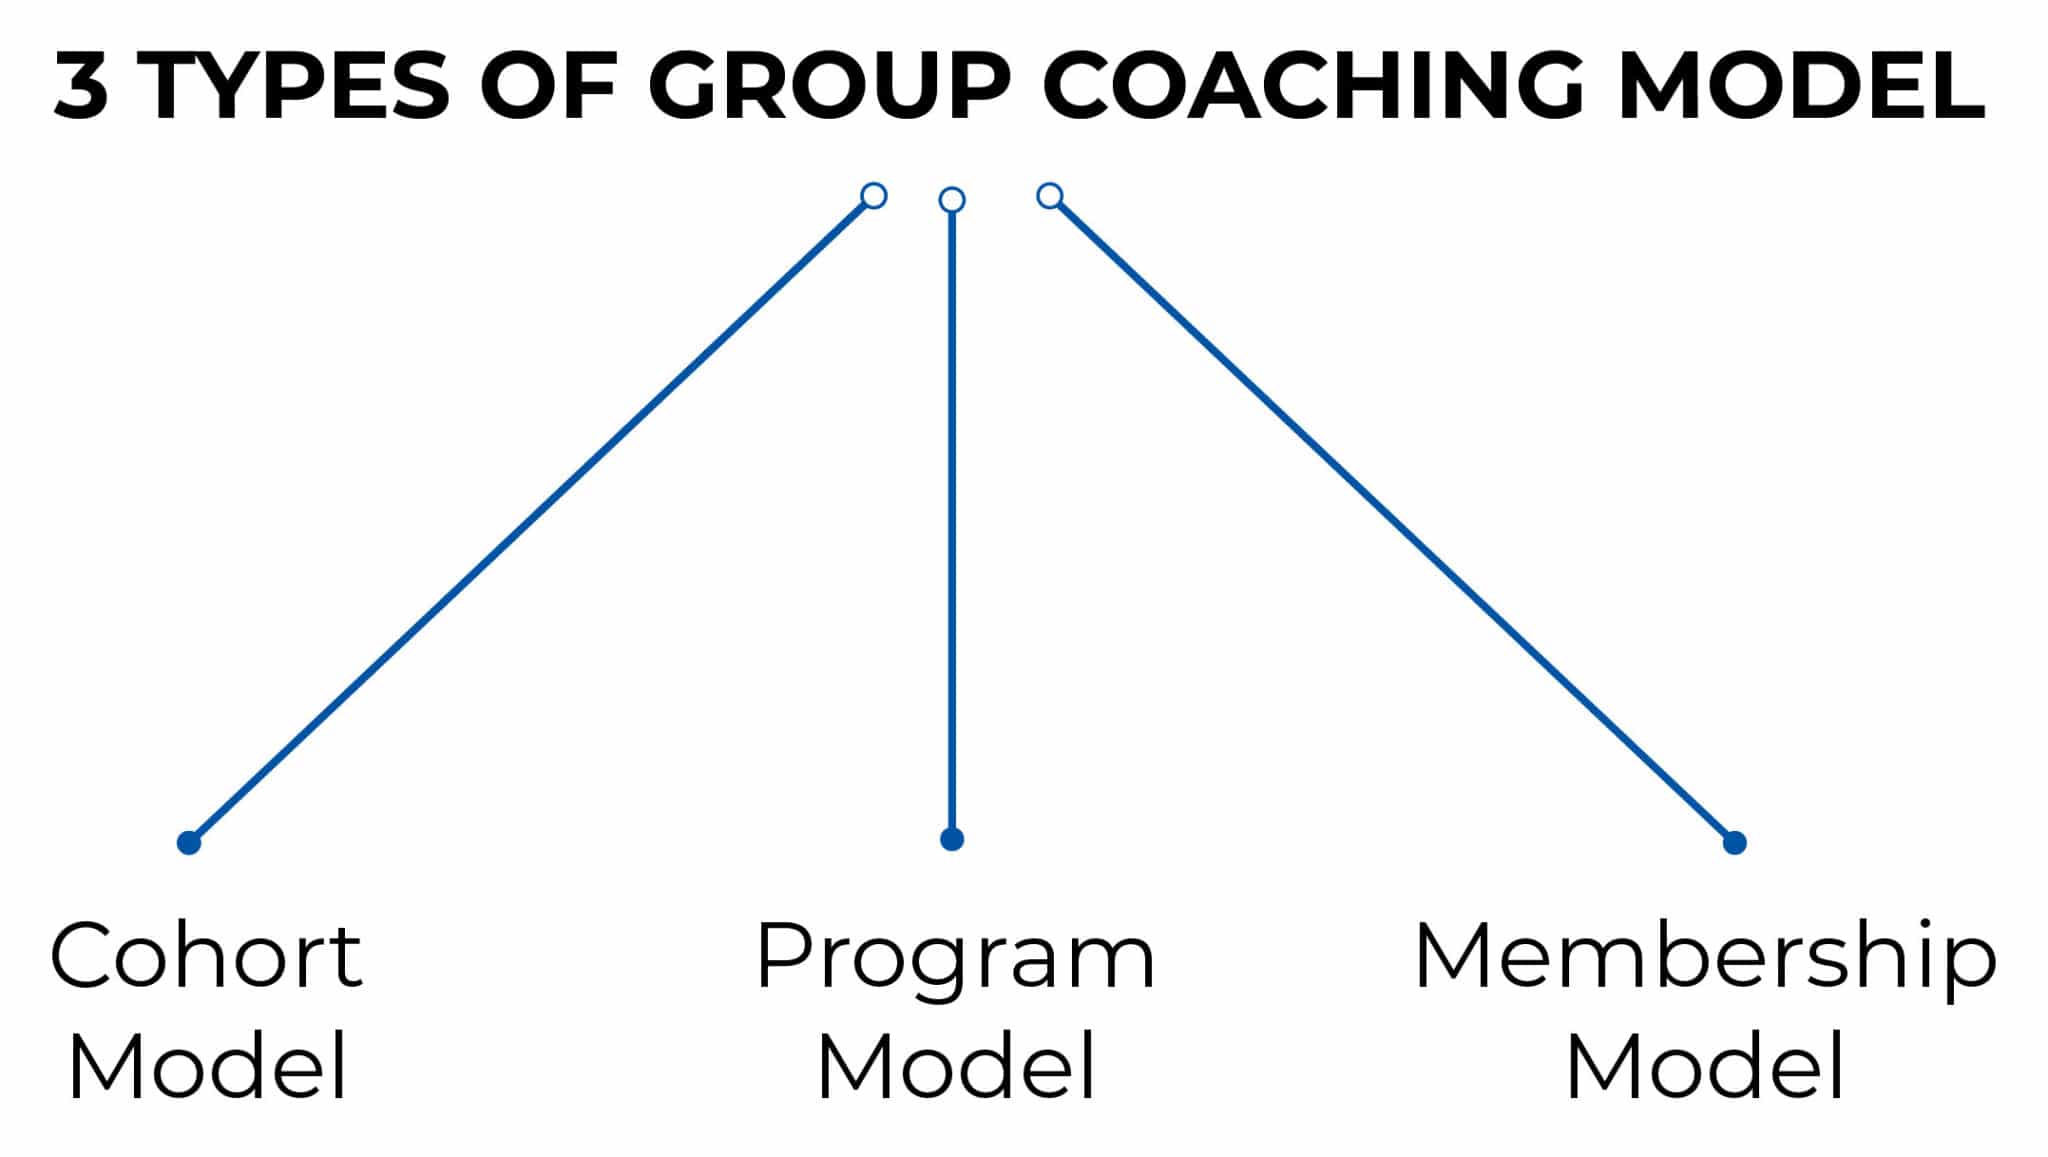 3 TYPES OF GROUP COACHING MODEL